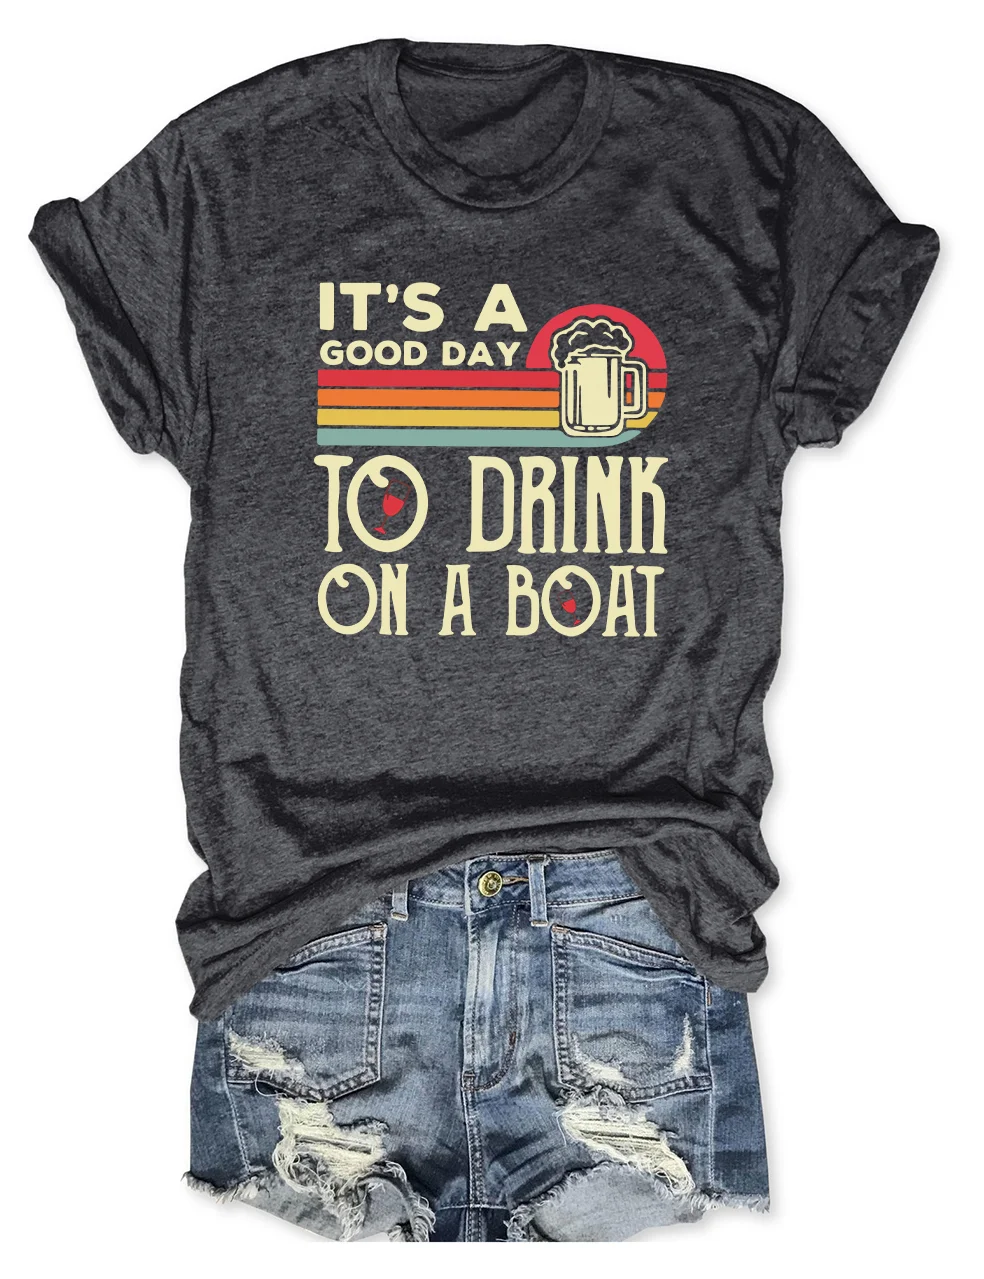 It's A Good Day To Drink On A Boat T-Shirt